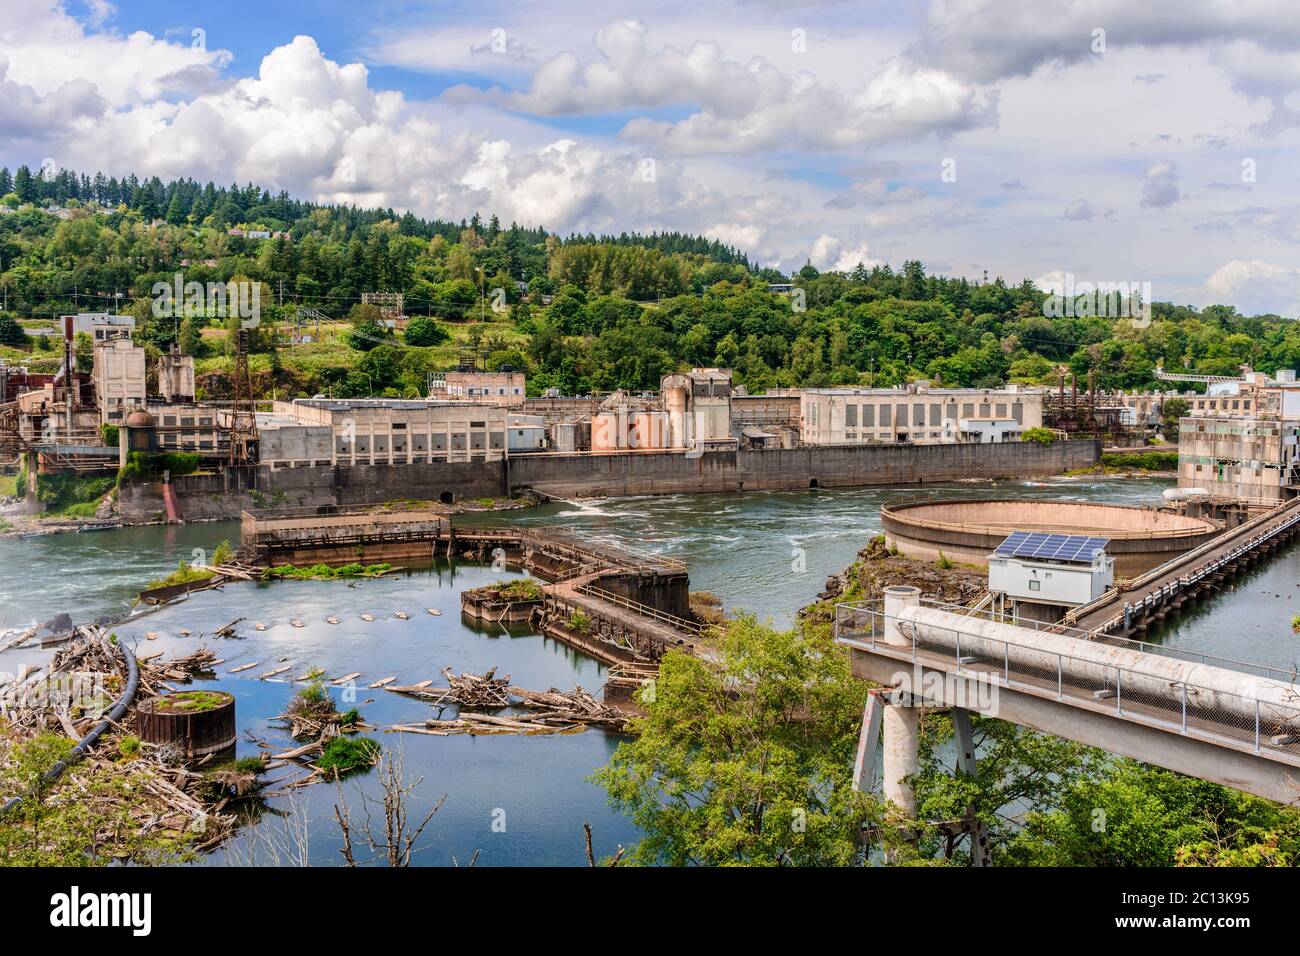 Image capture at view point located in Oregon City, Oregon. This is a great example of an industrial Waterfalls. Stock Photo